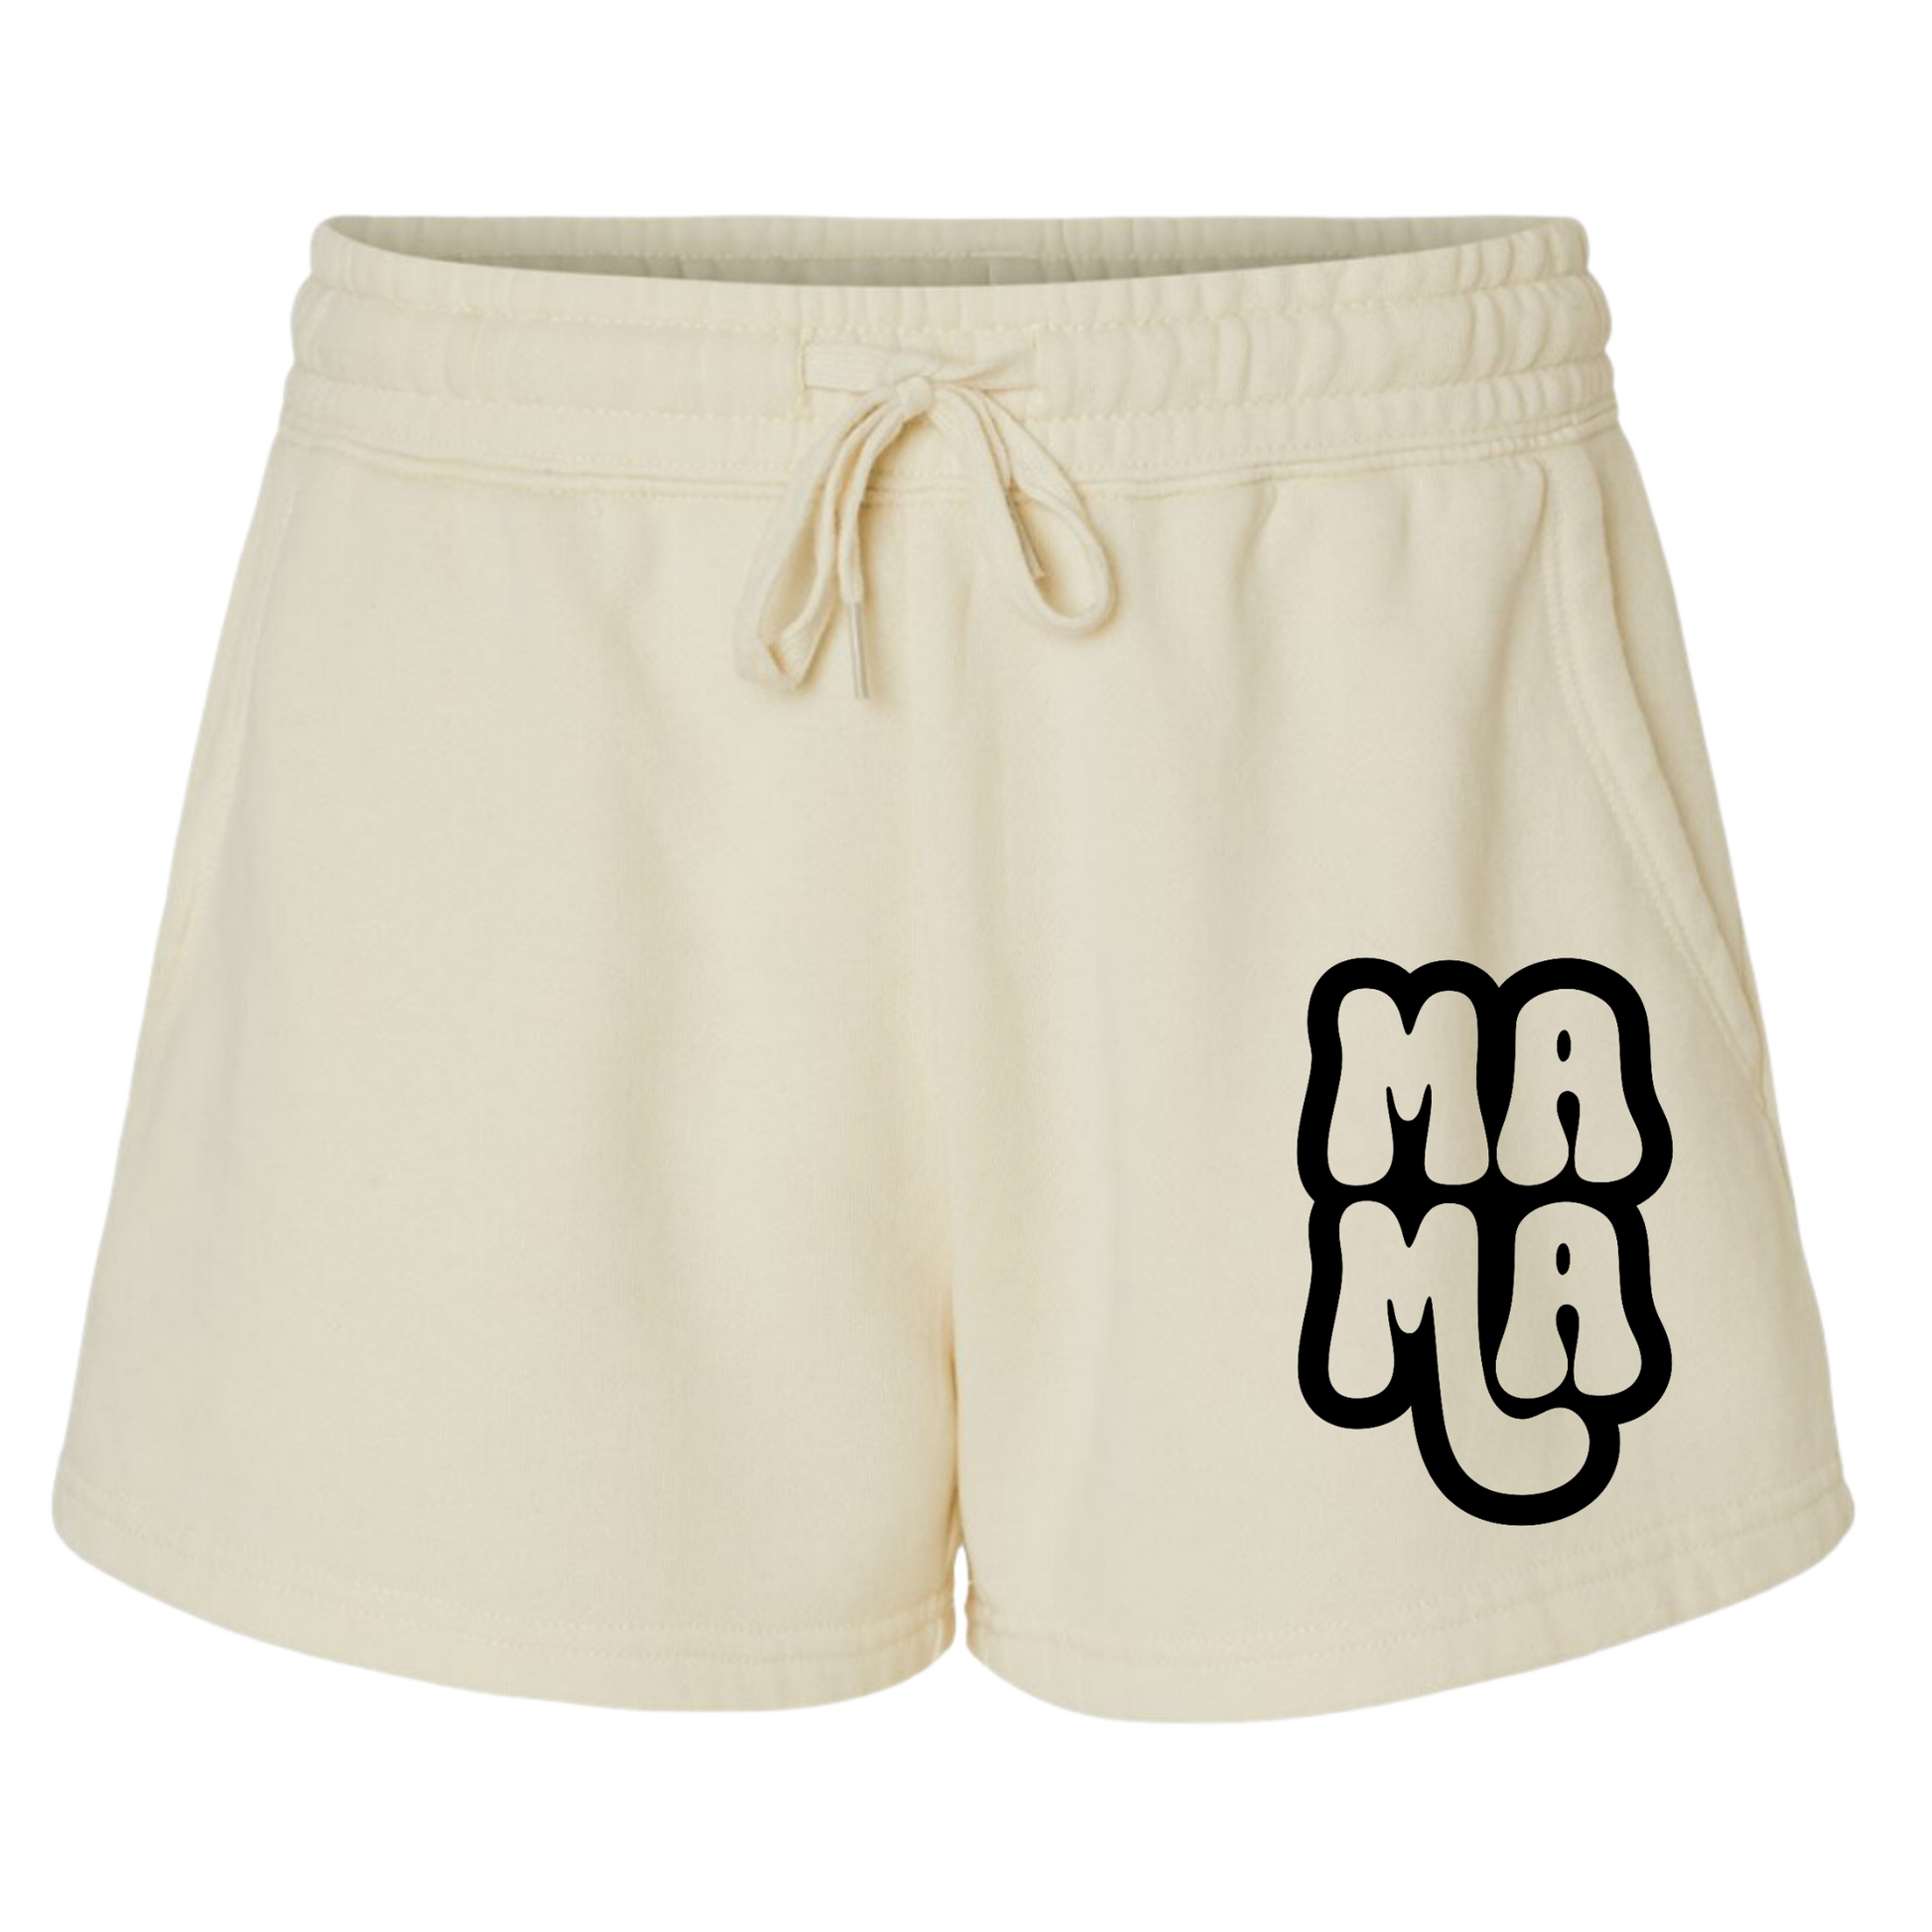 Mama Shorts in cream with a comfy warm fabric. Draw strings loop the front and small emblem of "mama" is on the right hand side of the short in black - on the front. This is the front view of the shorts.